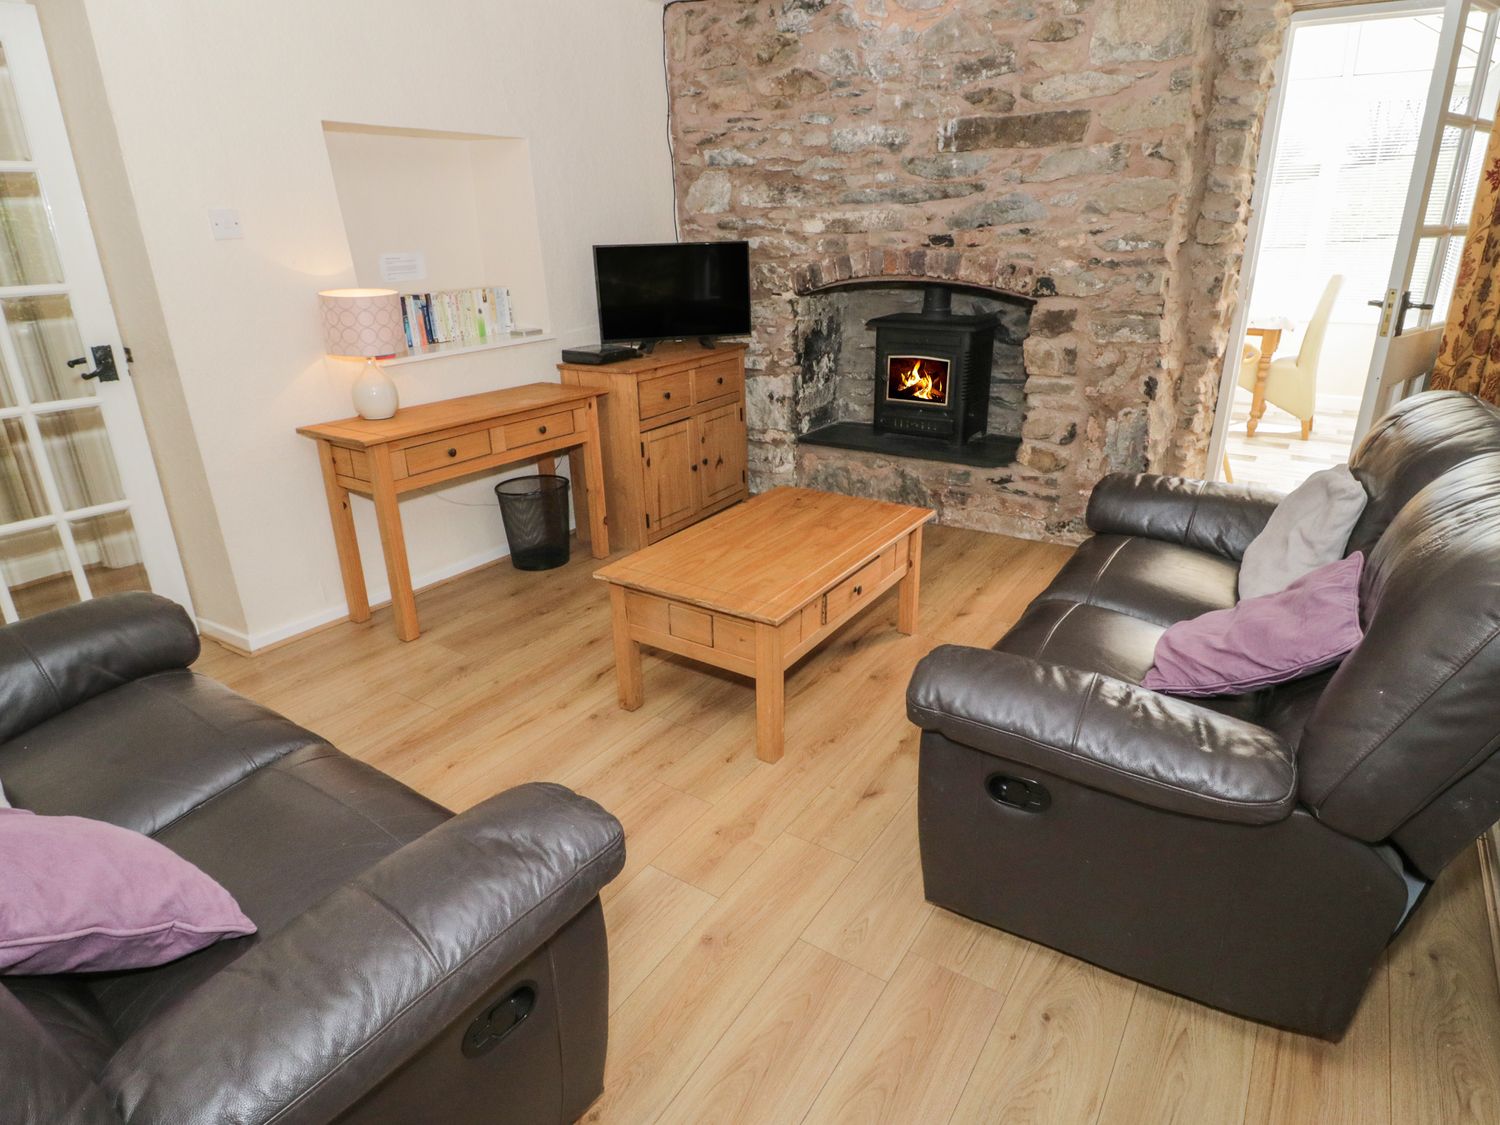 Glan Y Gors Cottage, Wales